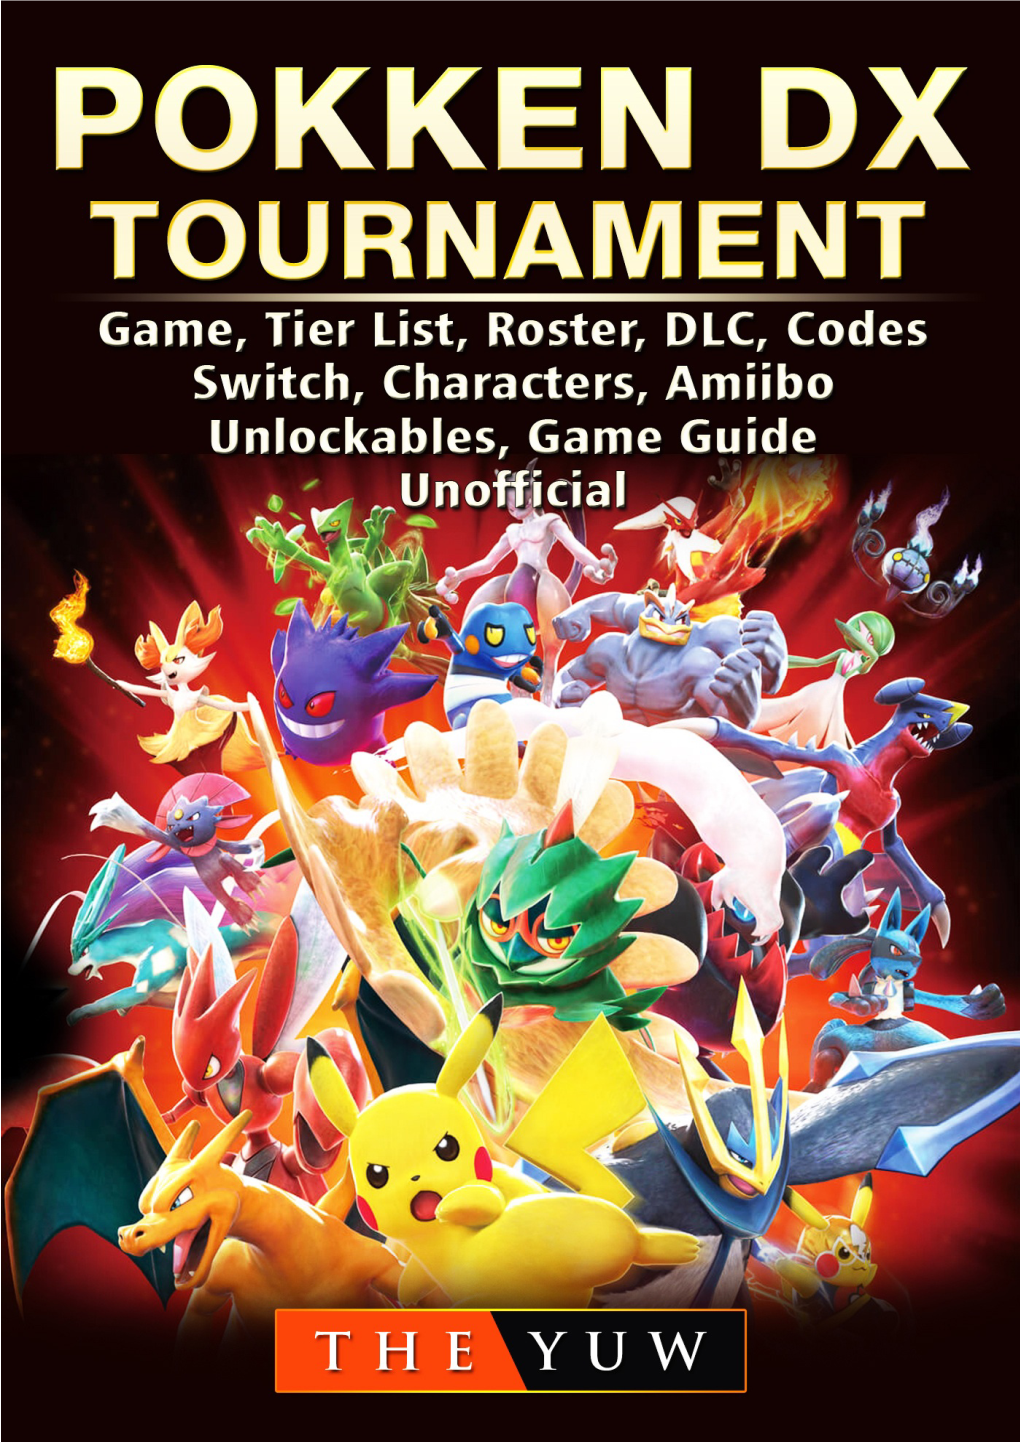 Pokken DX Tournament Game, Tier List, Roster, DLC, Codes, Switch, Characters, Amiibo, Unlockables, Game Guide Unofficial